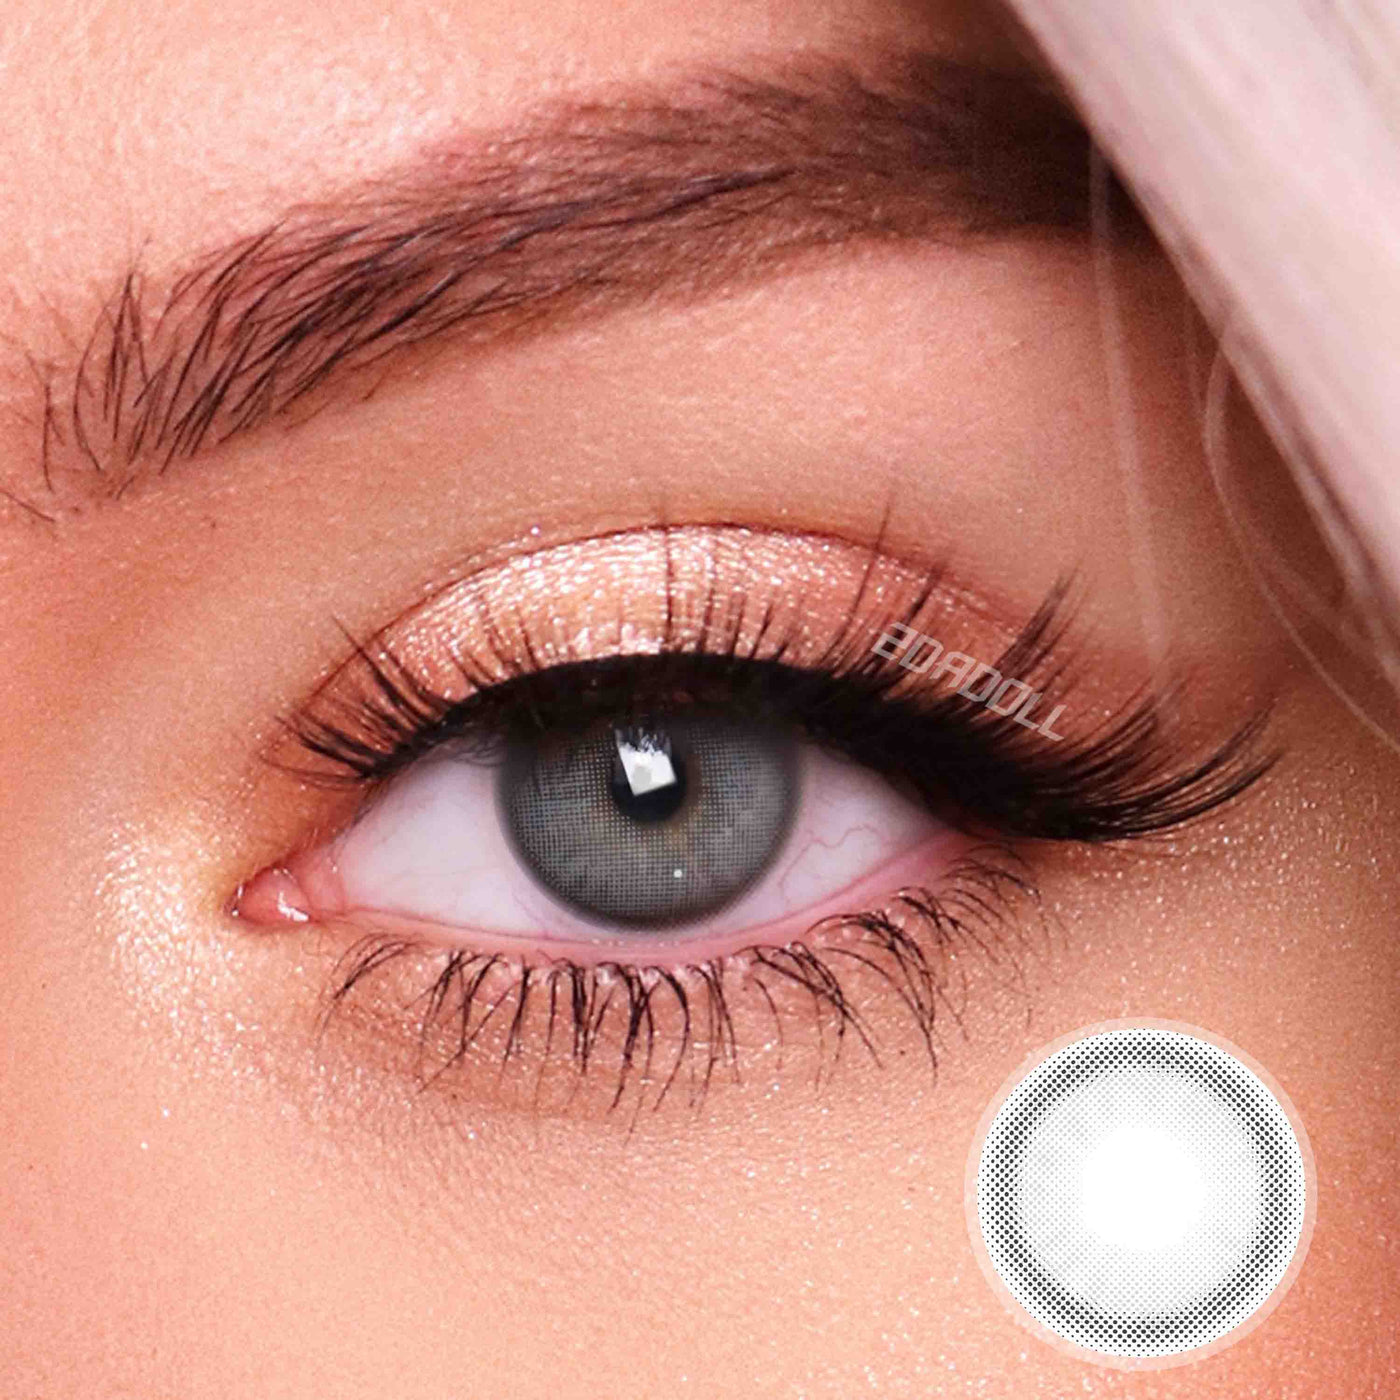 2Dadoll coko grey Contact Lenses(1 pair/6 months)